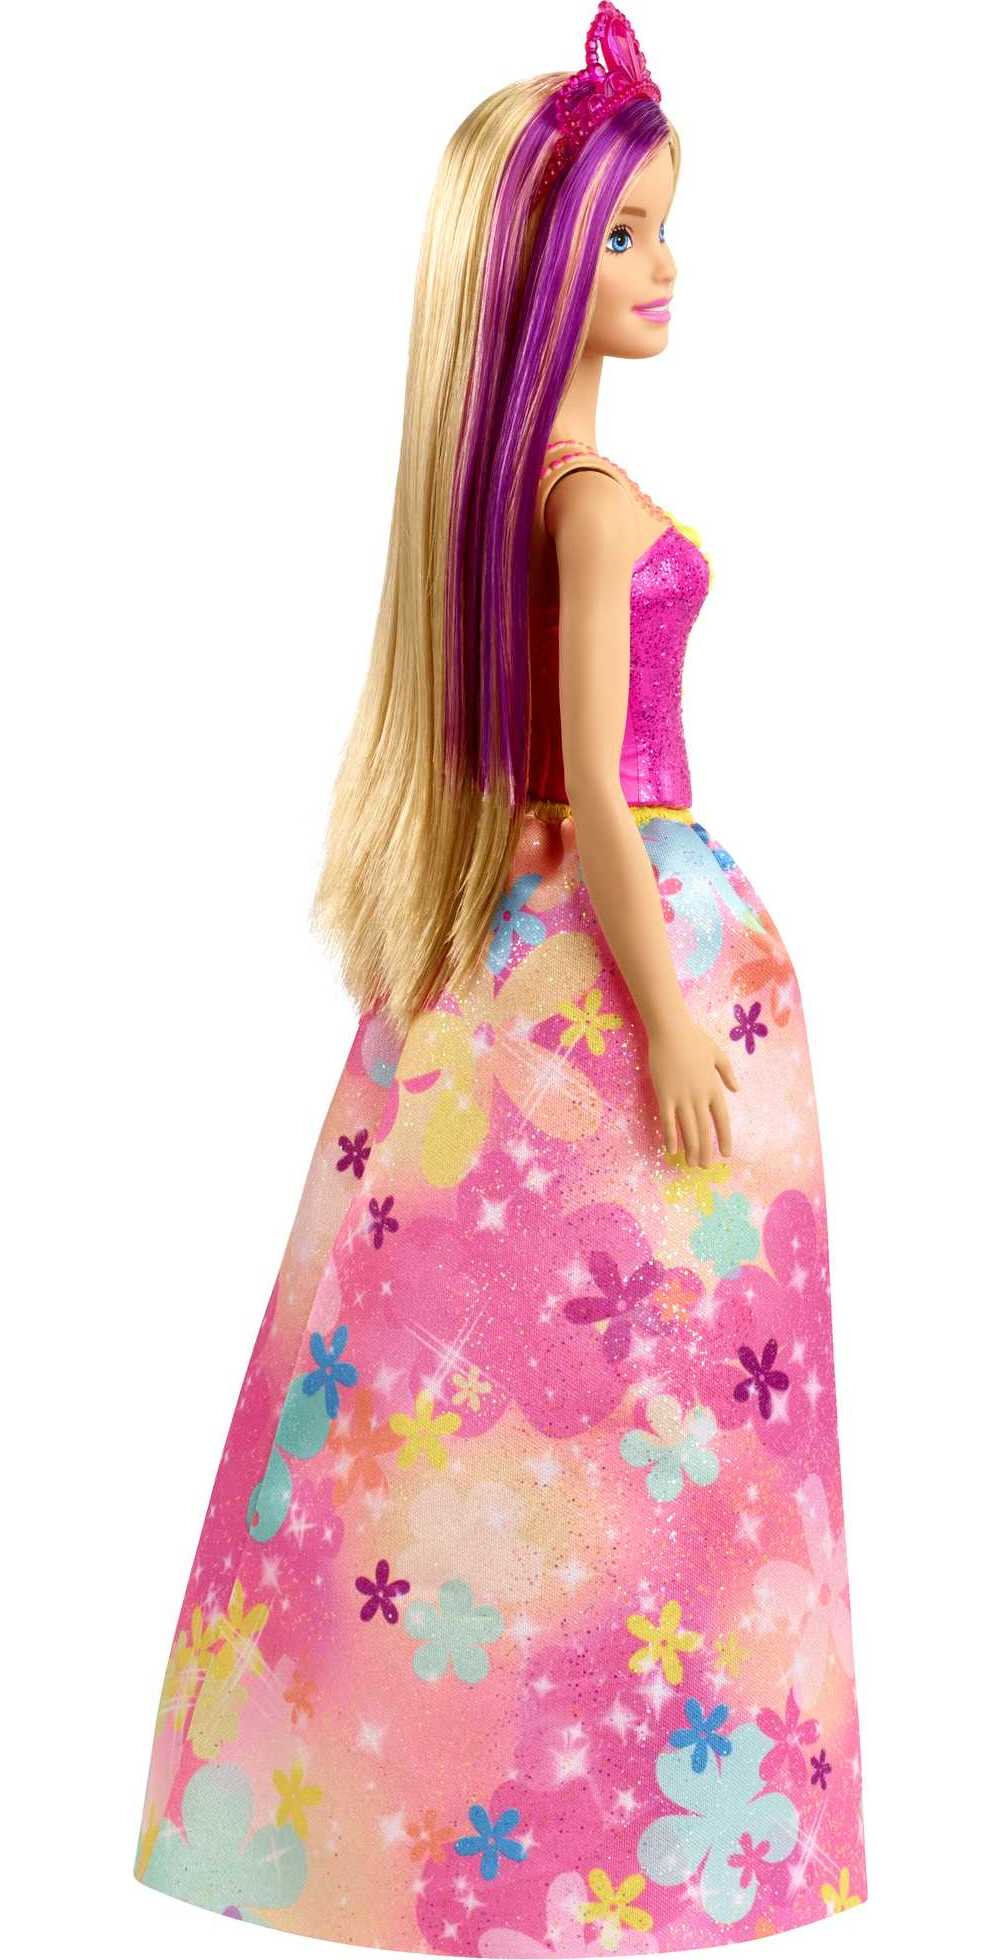 Barbie Dreamtopia Royal Doll with Blonde Hair with Purple Streak & Accessories - image 5 of 6